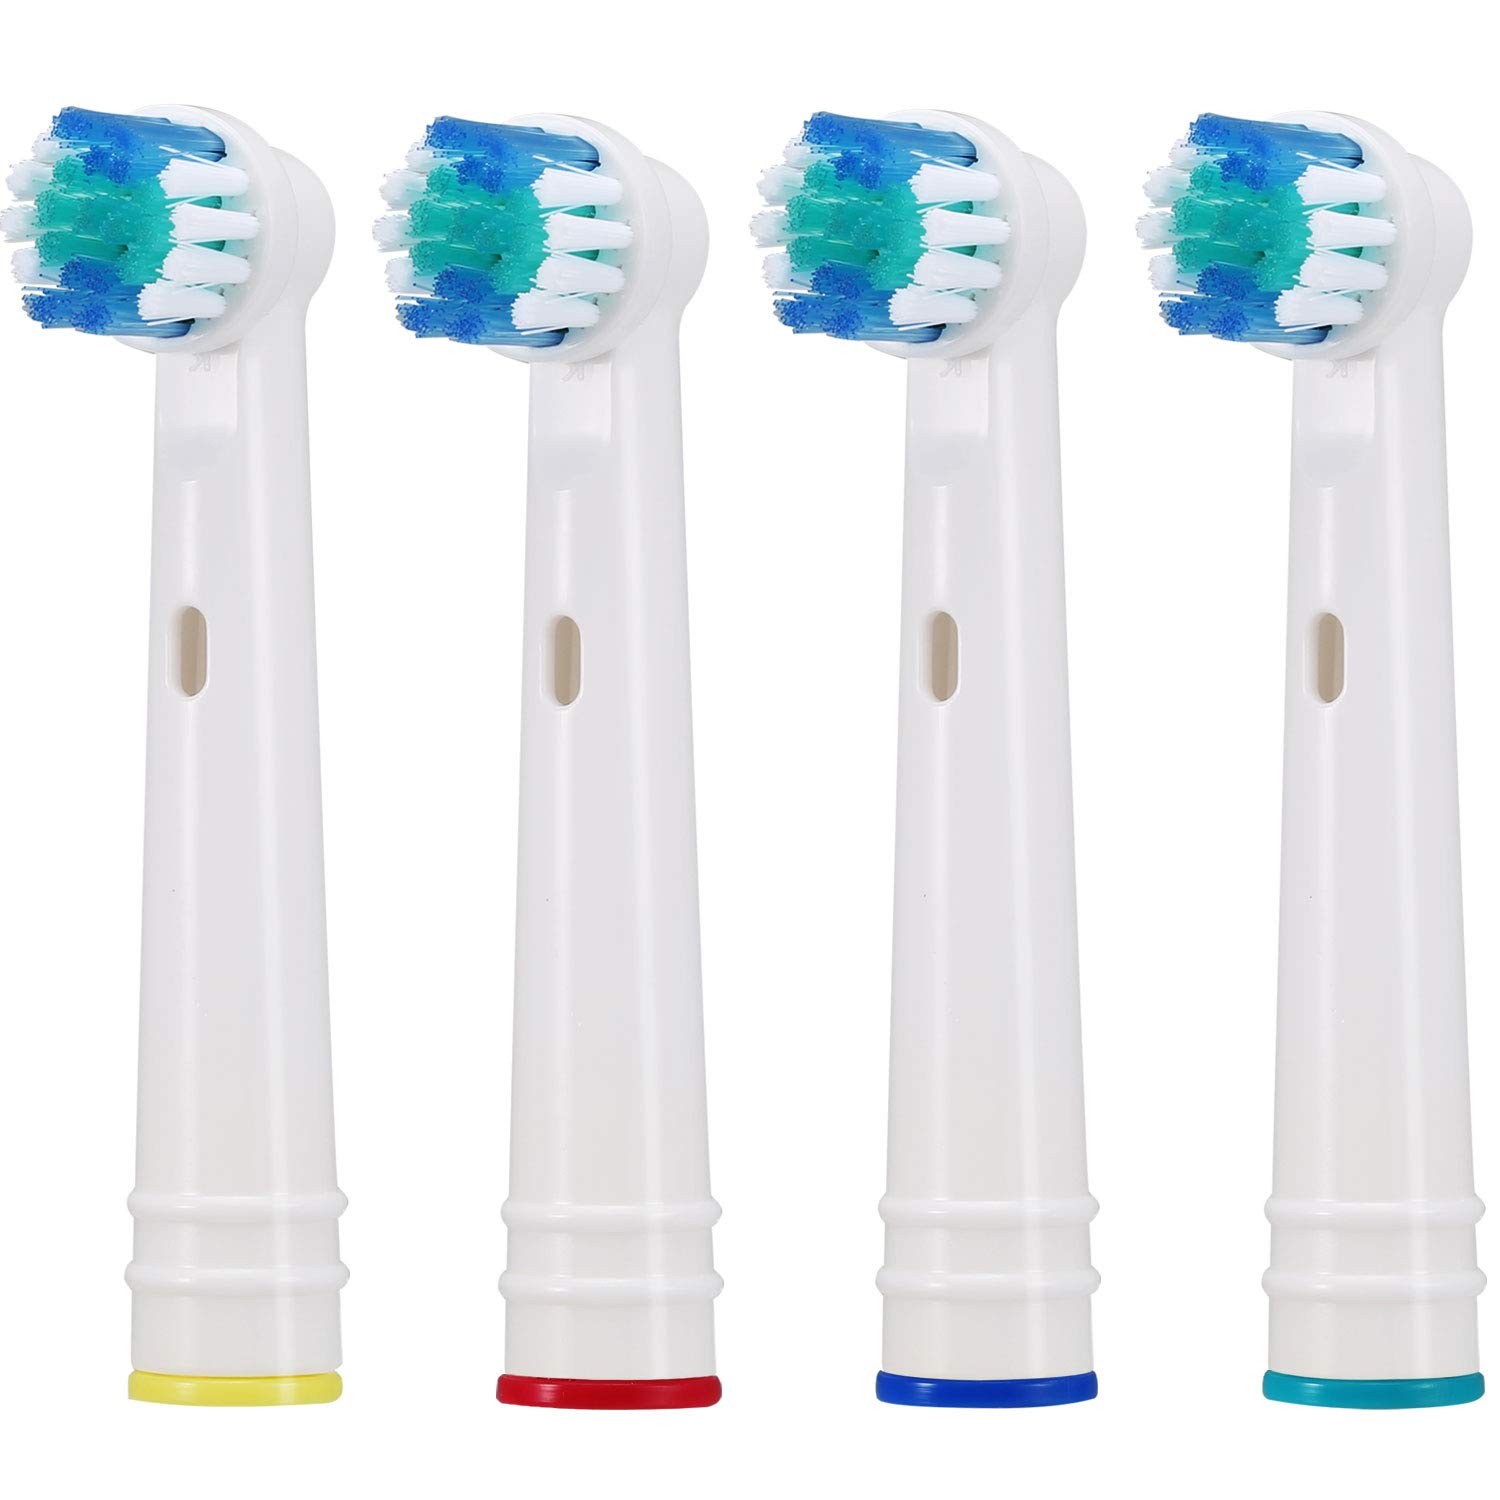 Patent Free Electric Toothbrush Replacement Heads Brushes Refill 4pcs